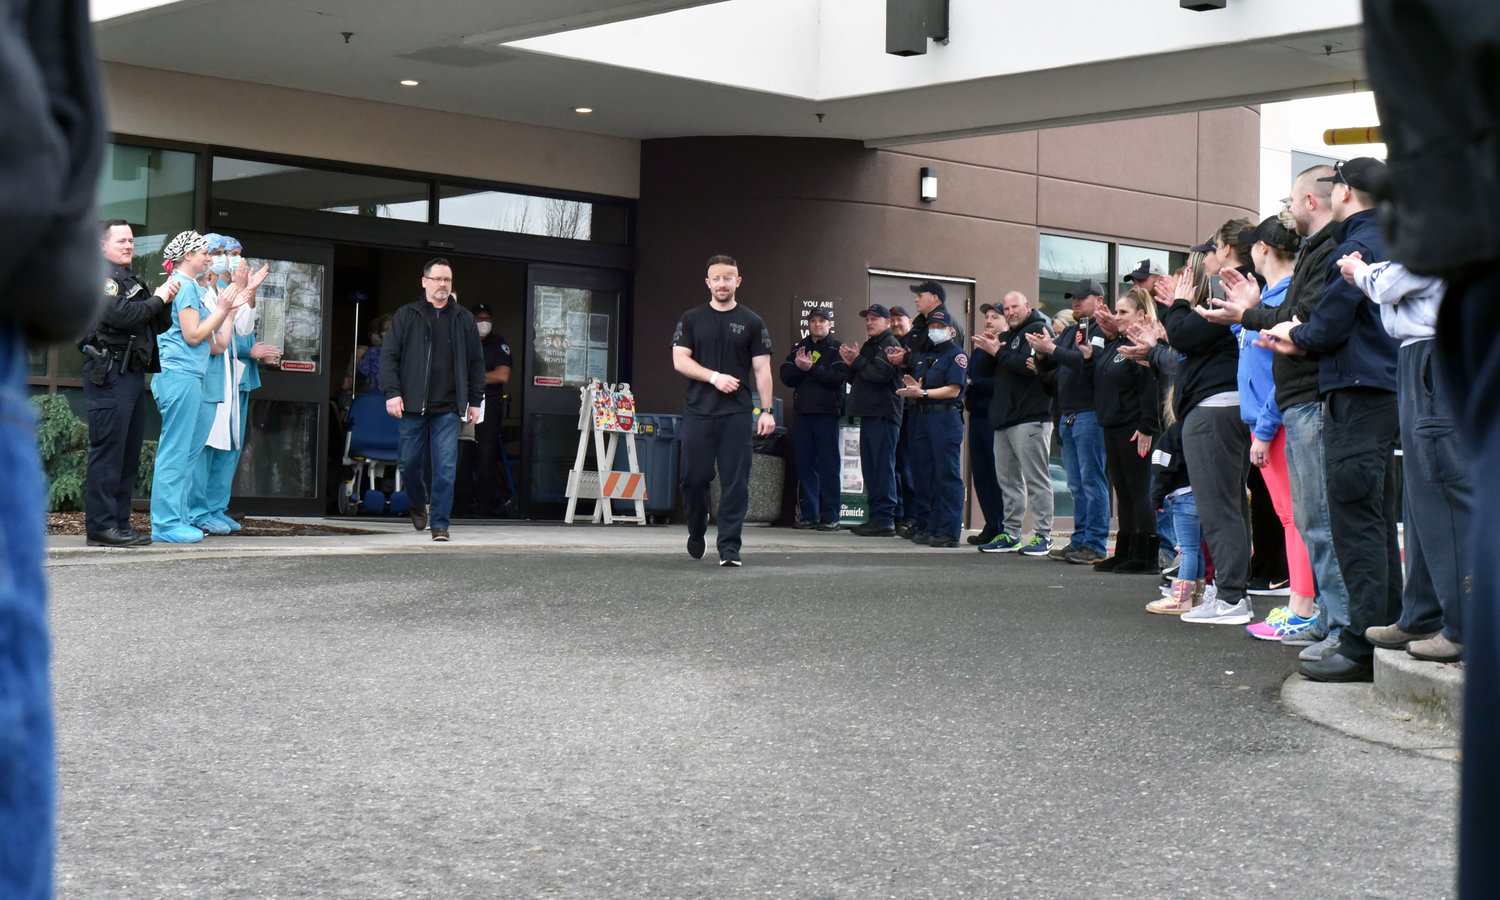 Flanked by lines of medical staff, law enforcement and other emergency responders, officer Stephen Summers walked out of the west entrance of the hospital to heavy applause. 